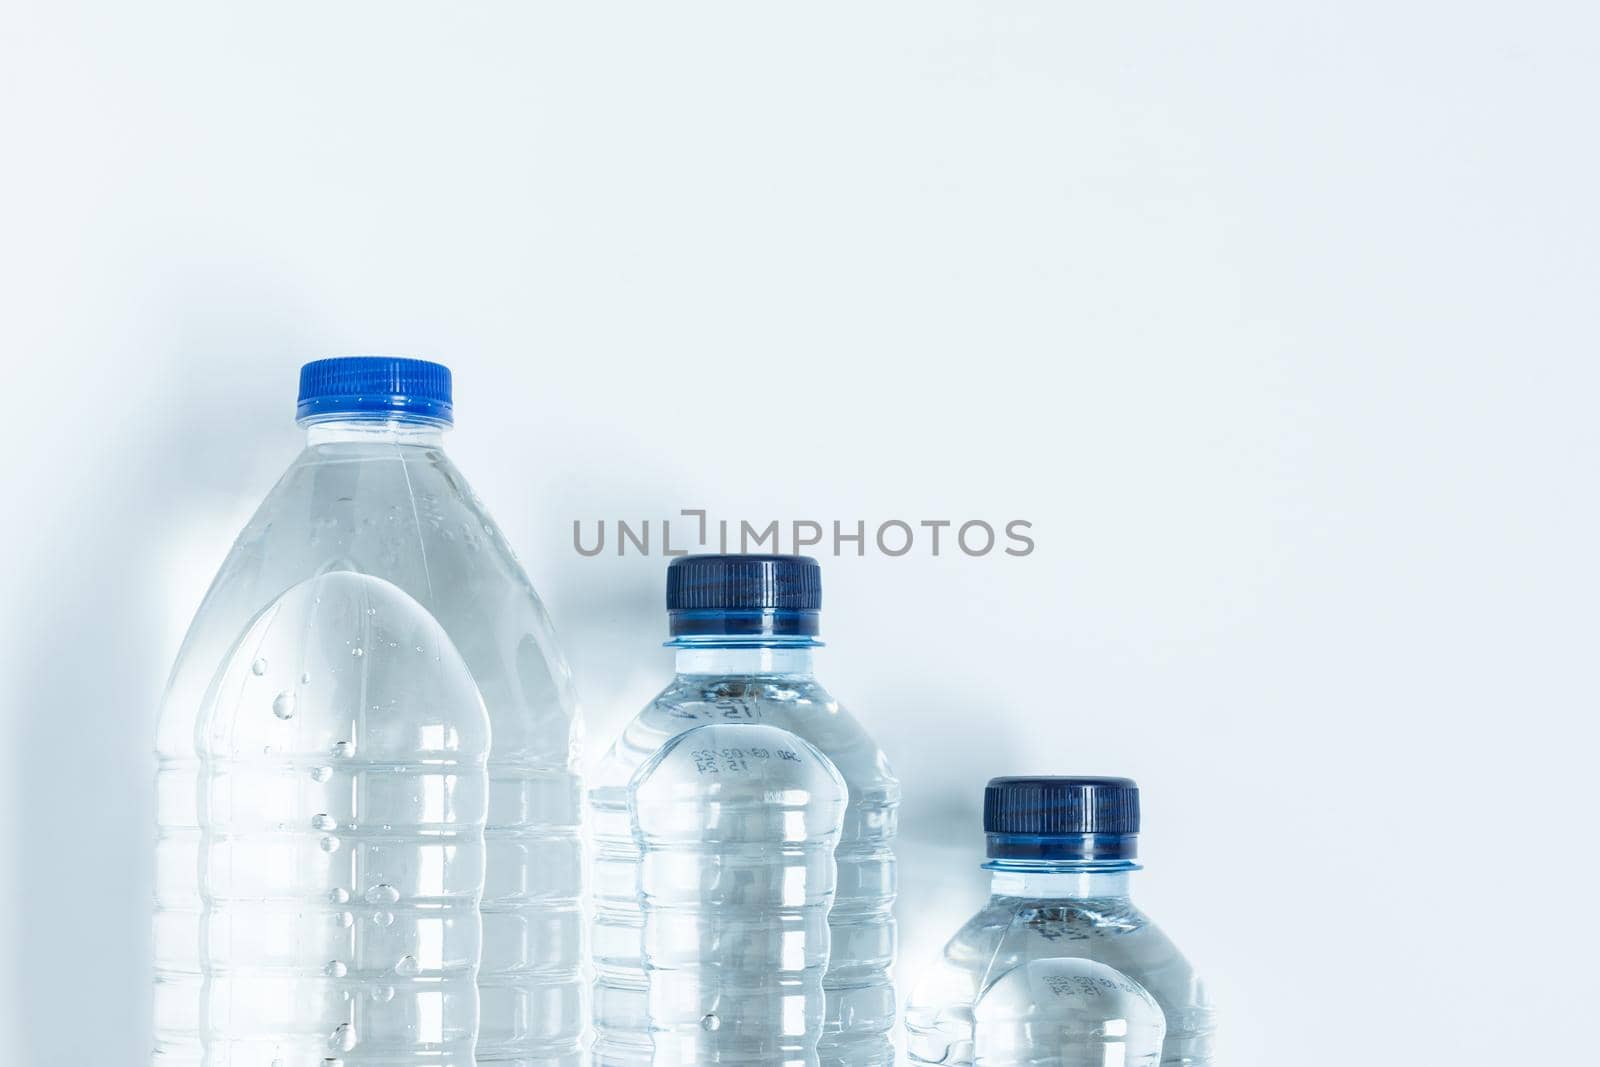 three plastic bottles with blue caps filled with mineral water placed on ladder viewed from above on white background